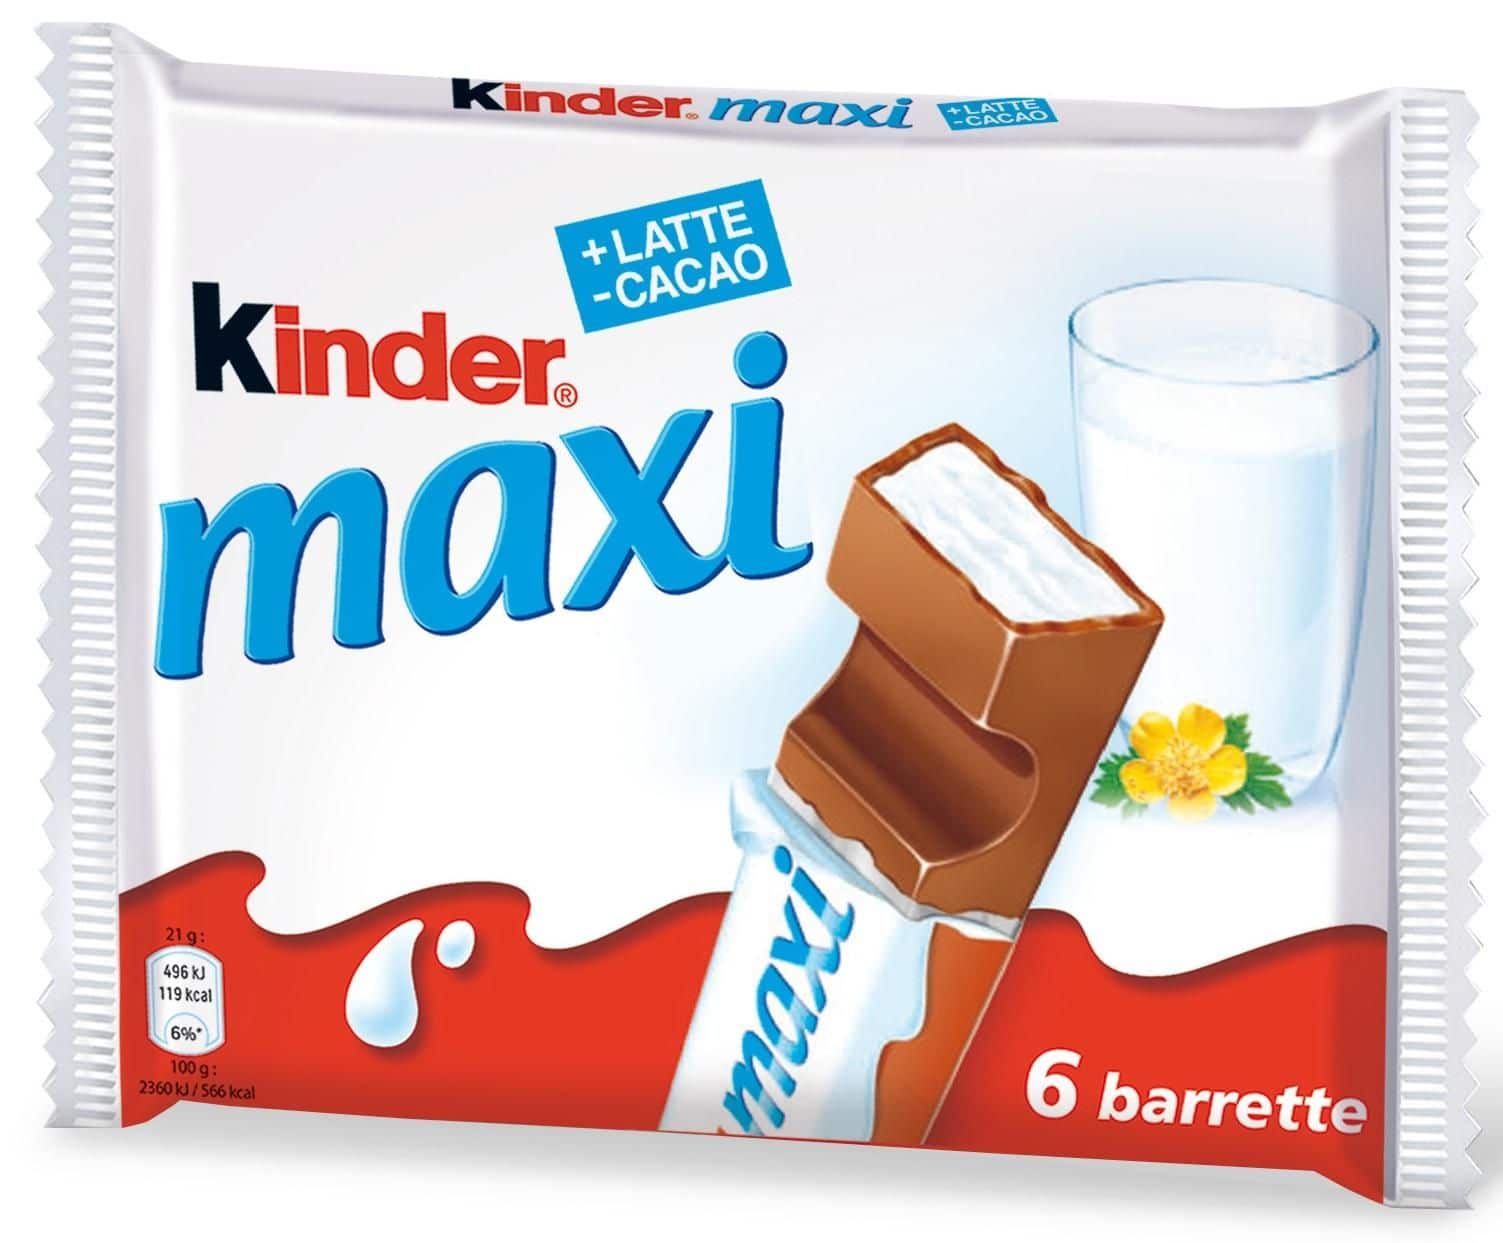 Ferrero: Kinder Maxi 6 pz 126gr (4.44 oz) Imported from Italy